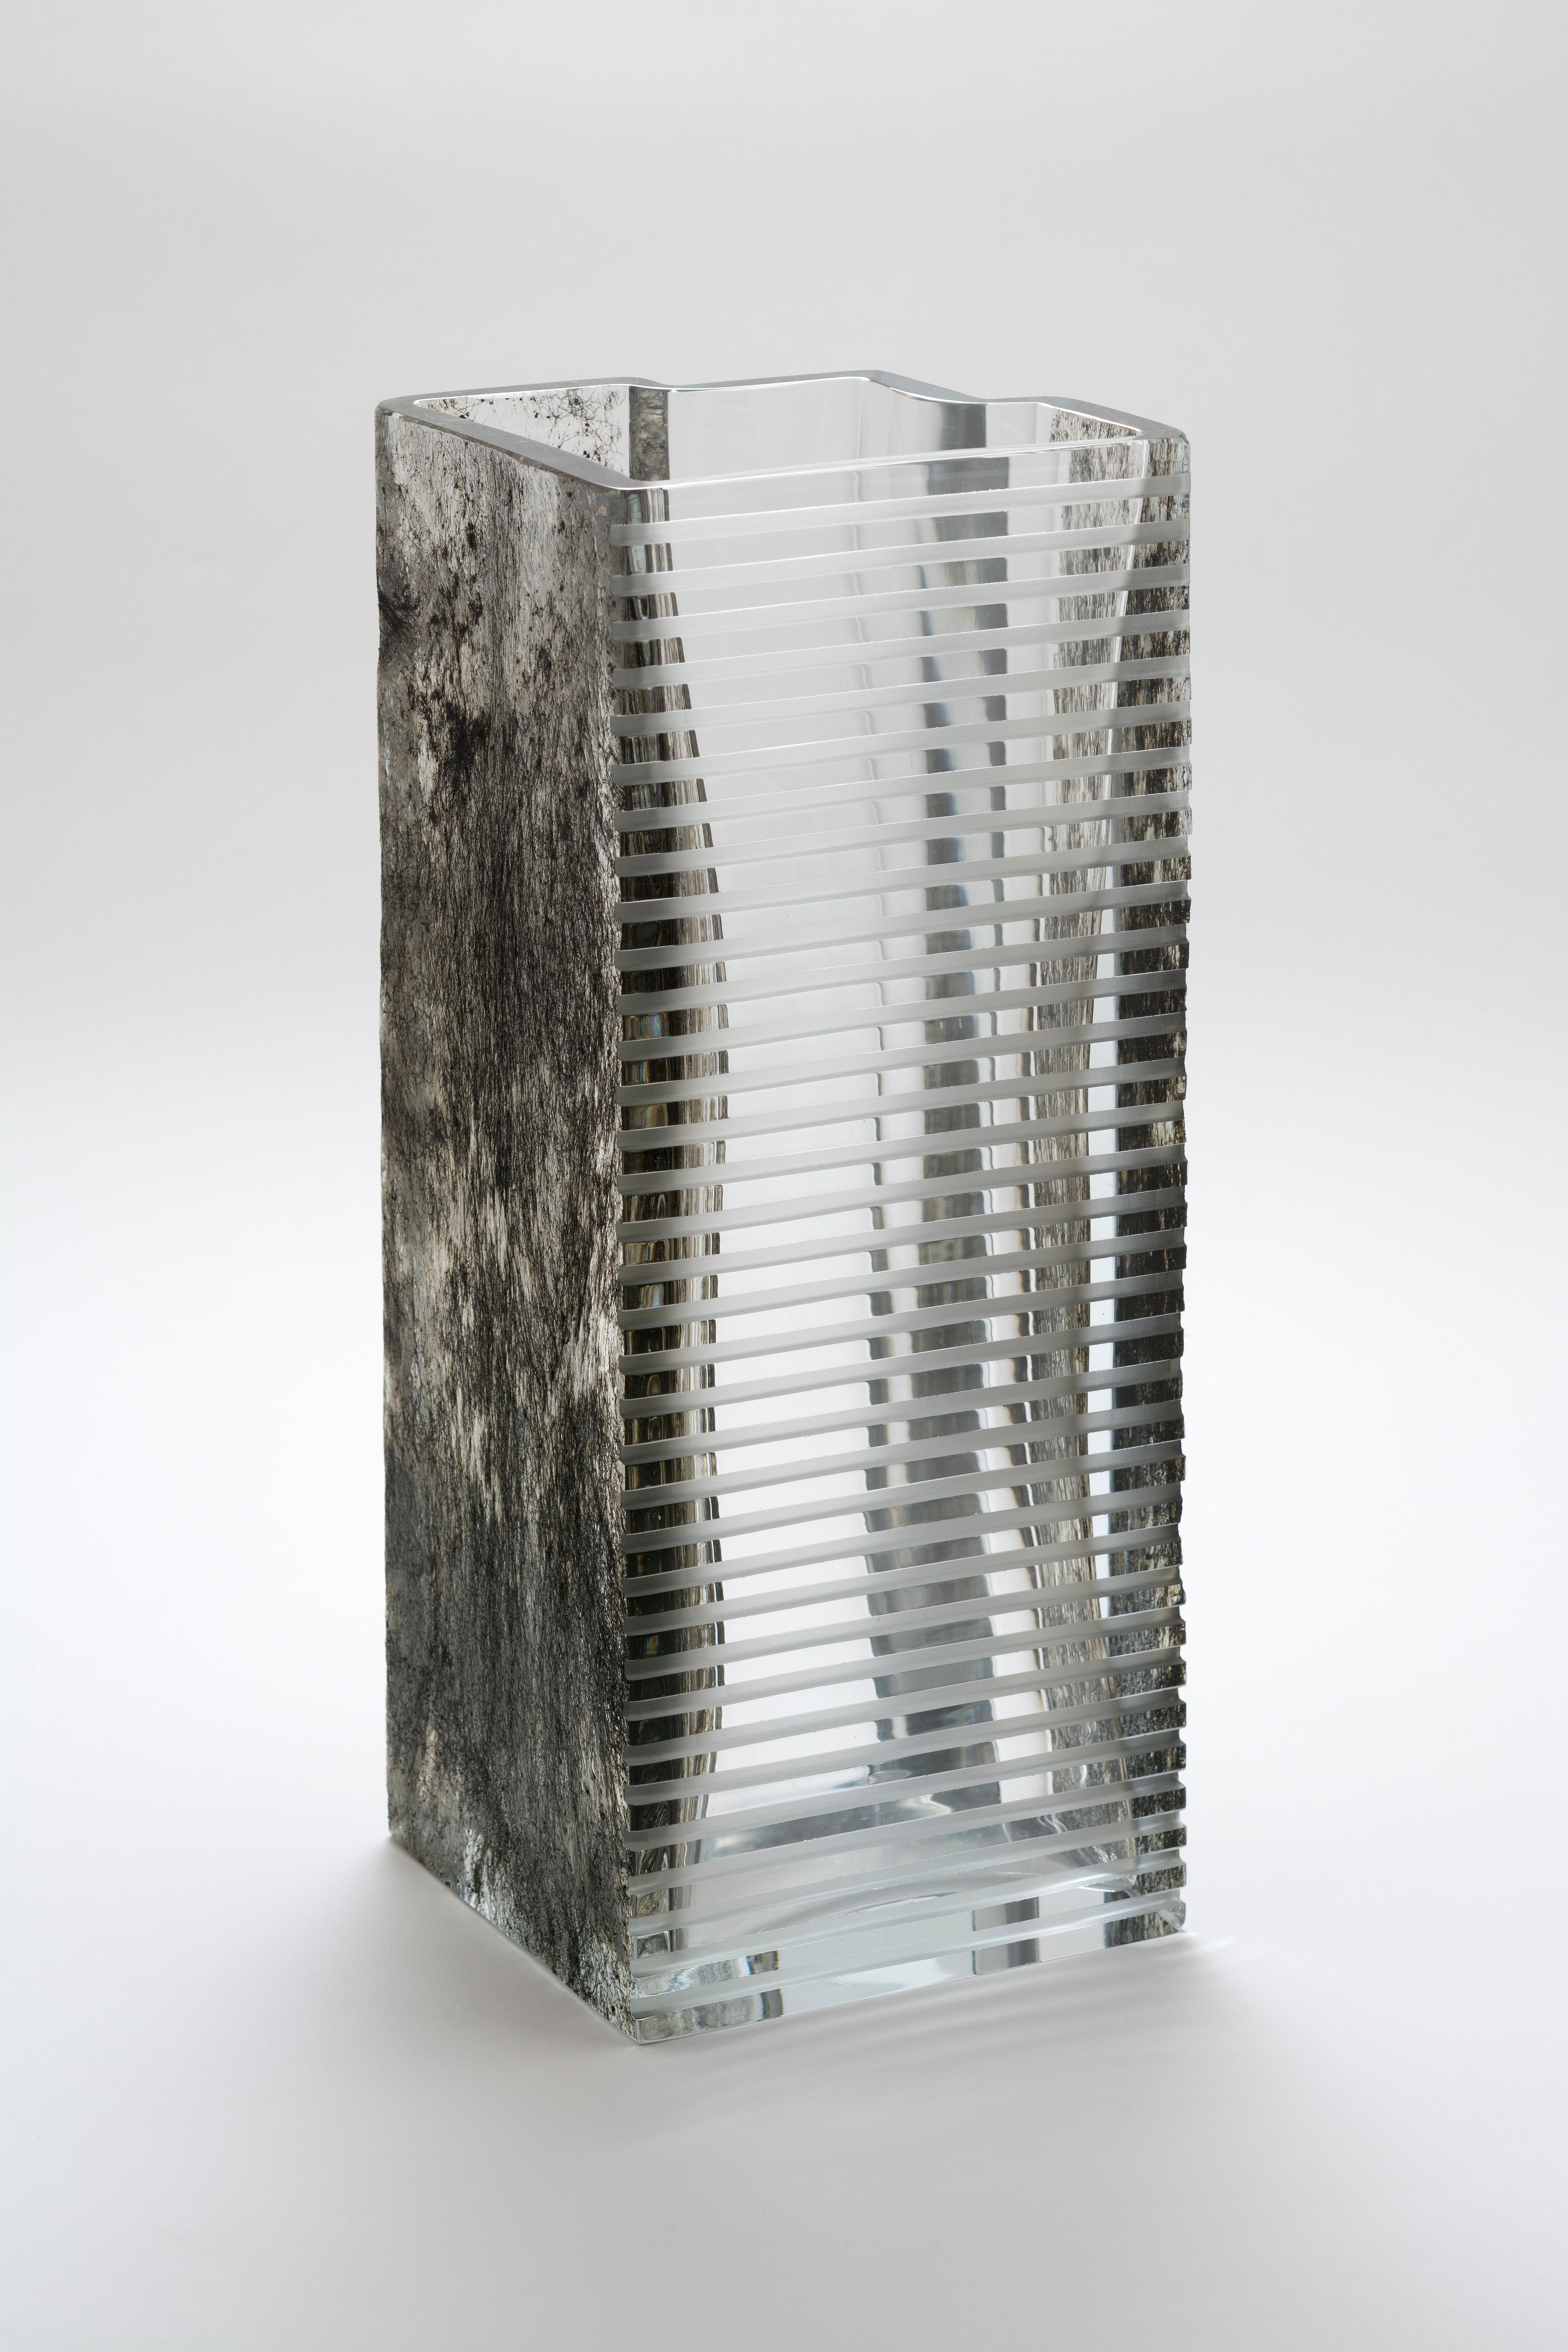 Beyond the Dark Forest vase by Paolo Marcolongo
Dimensions: 42 x 16.3 x H 17 cm 
Materials: Murano glass and iron. 


Paolo Marcolongo was born in Padua in 1956, he attended the Art High School 